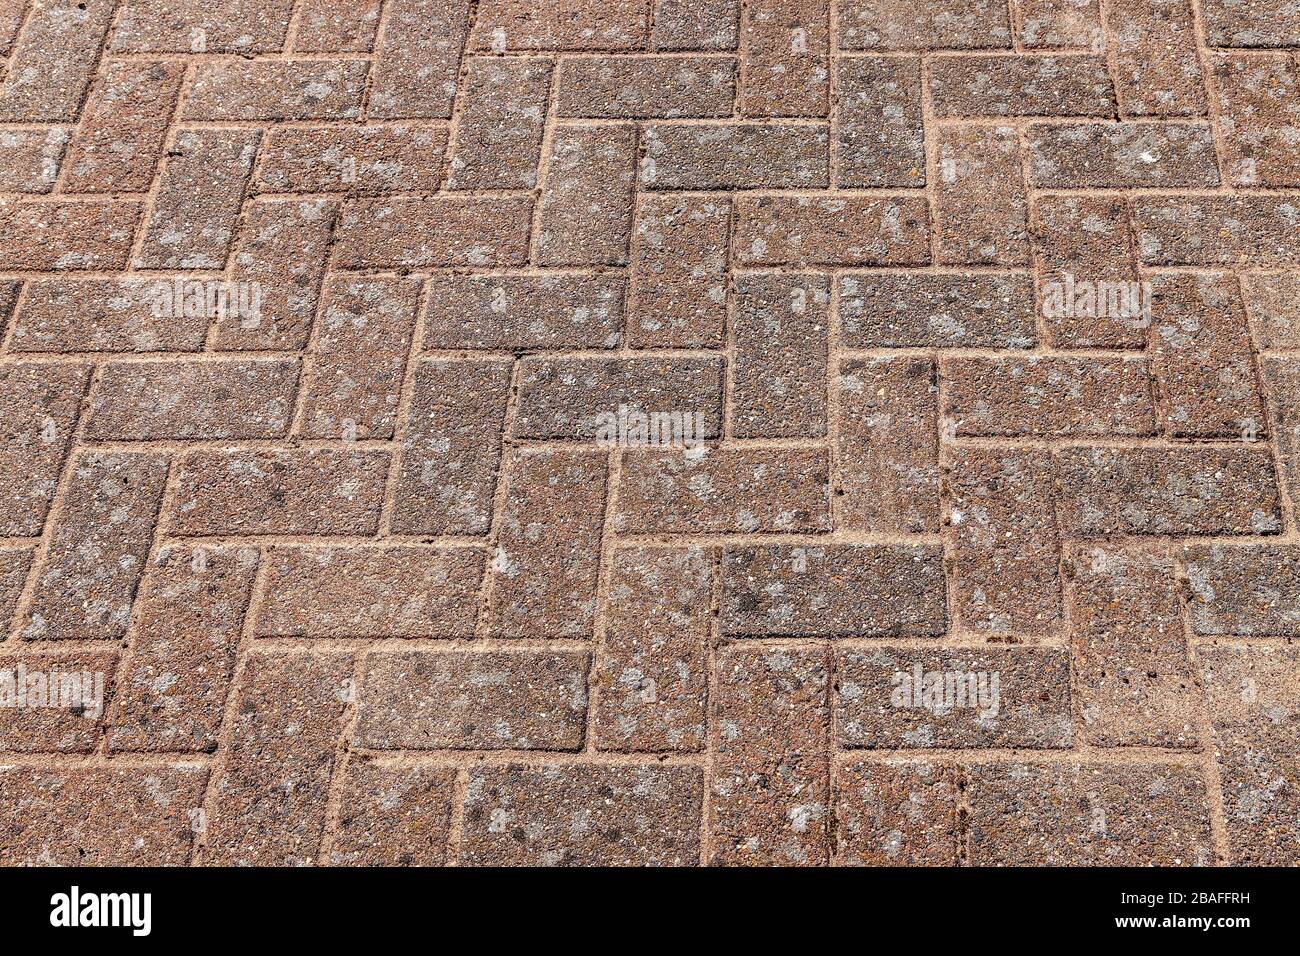 Block paving after being Jetwashing and joint sanded, garden work getting done while in Isolation due to the Coronavirus, March 2020, Northampton, UK. Stock Photo